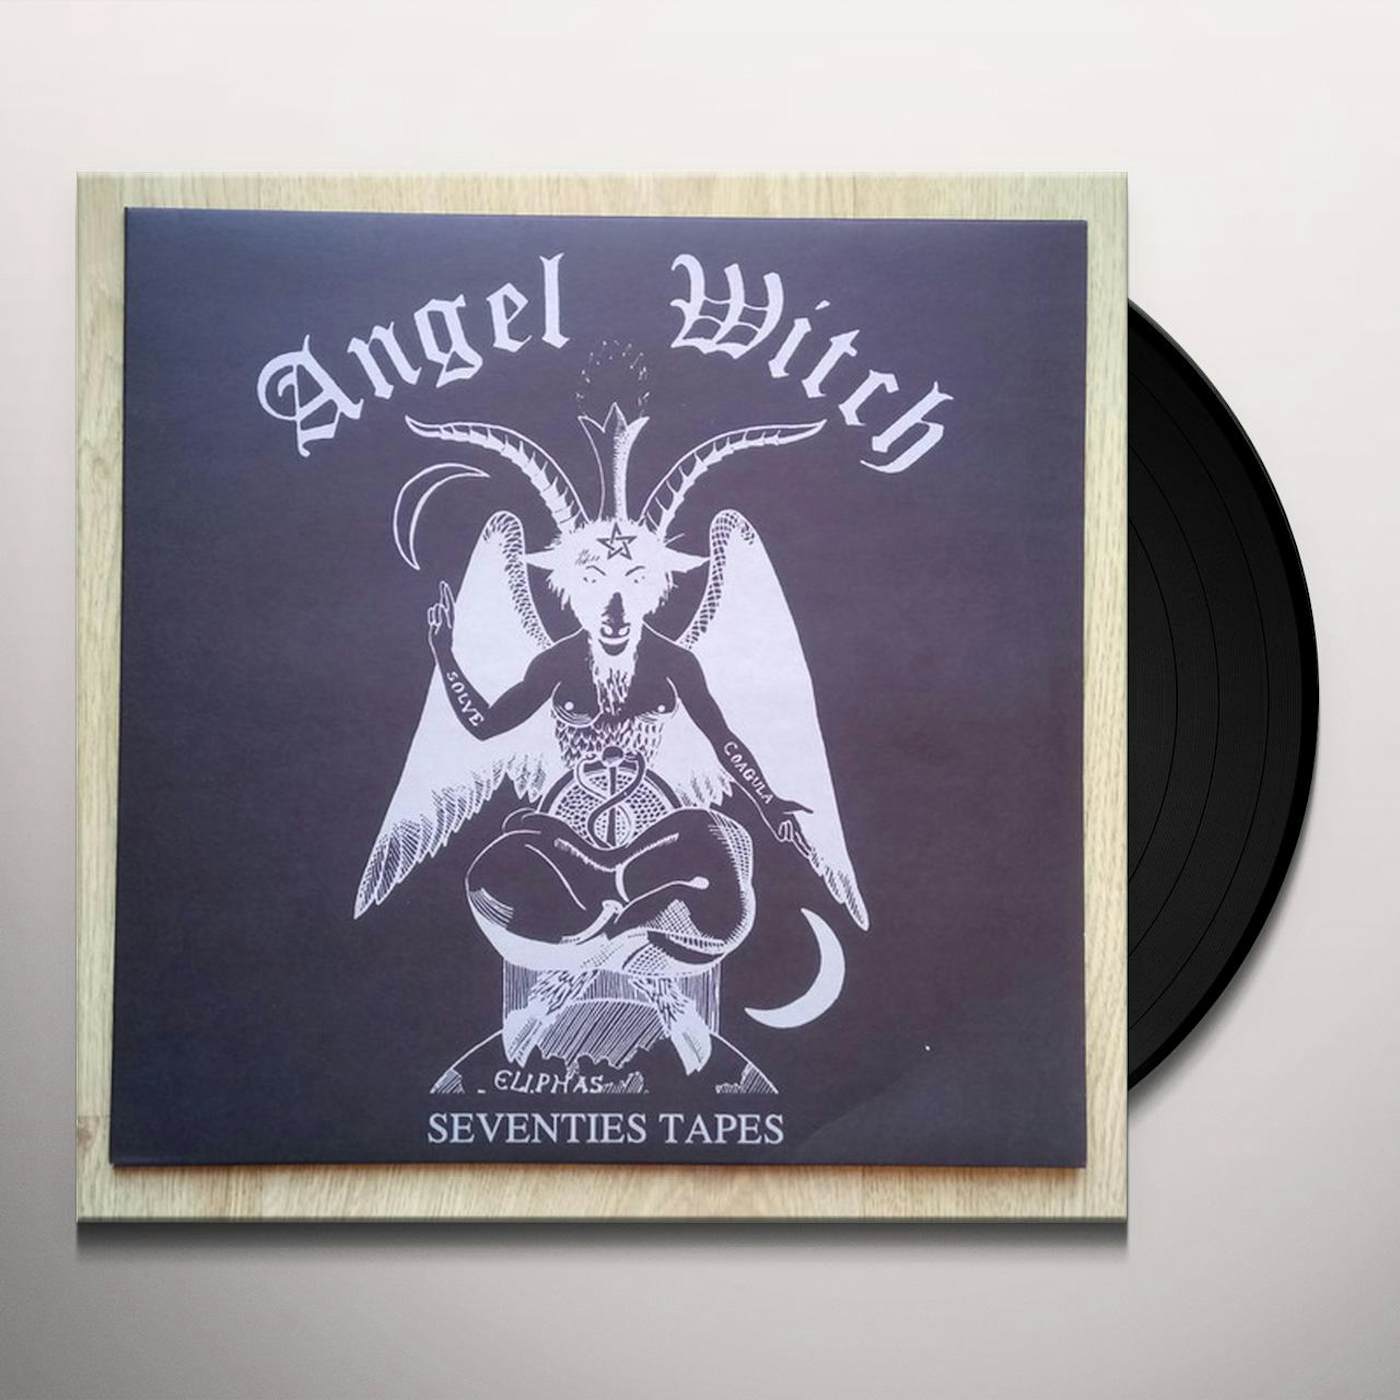 Seventies Tapes Vinyl Record - Angel Witch